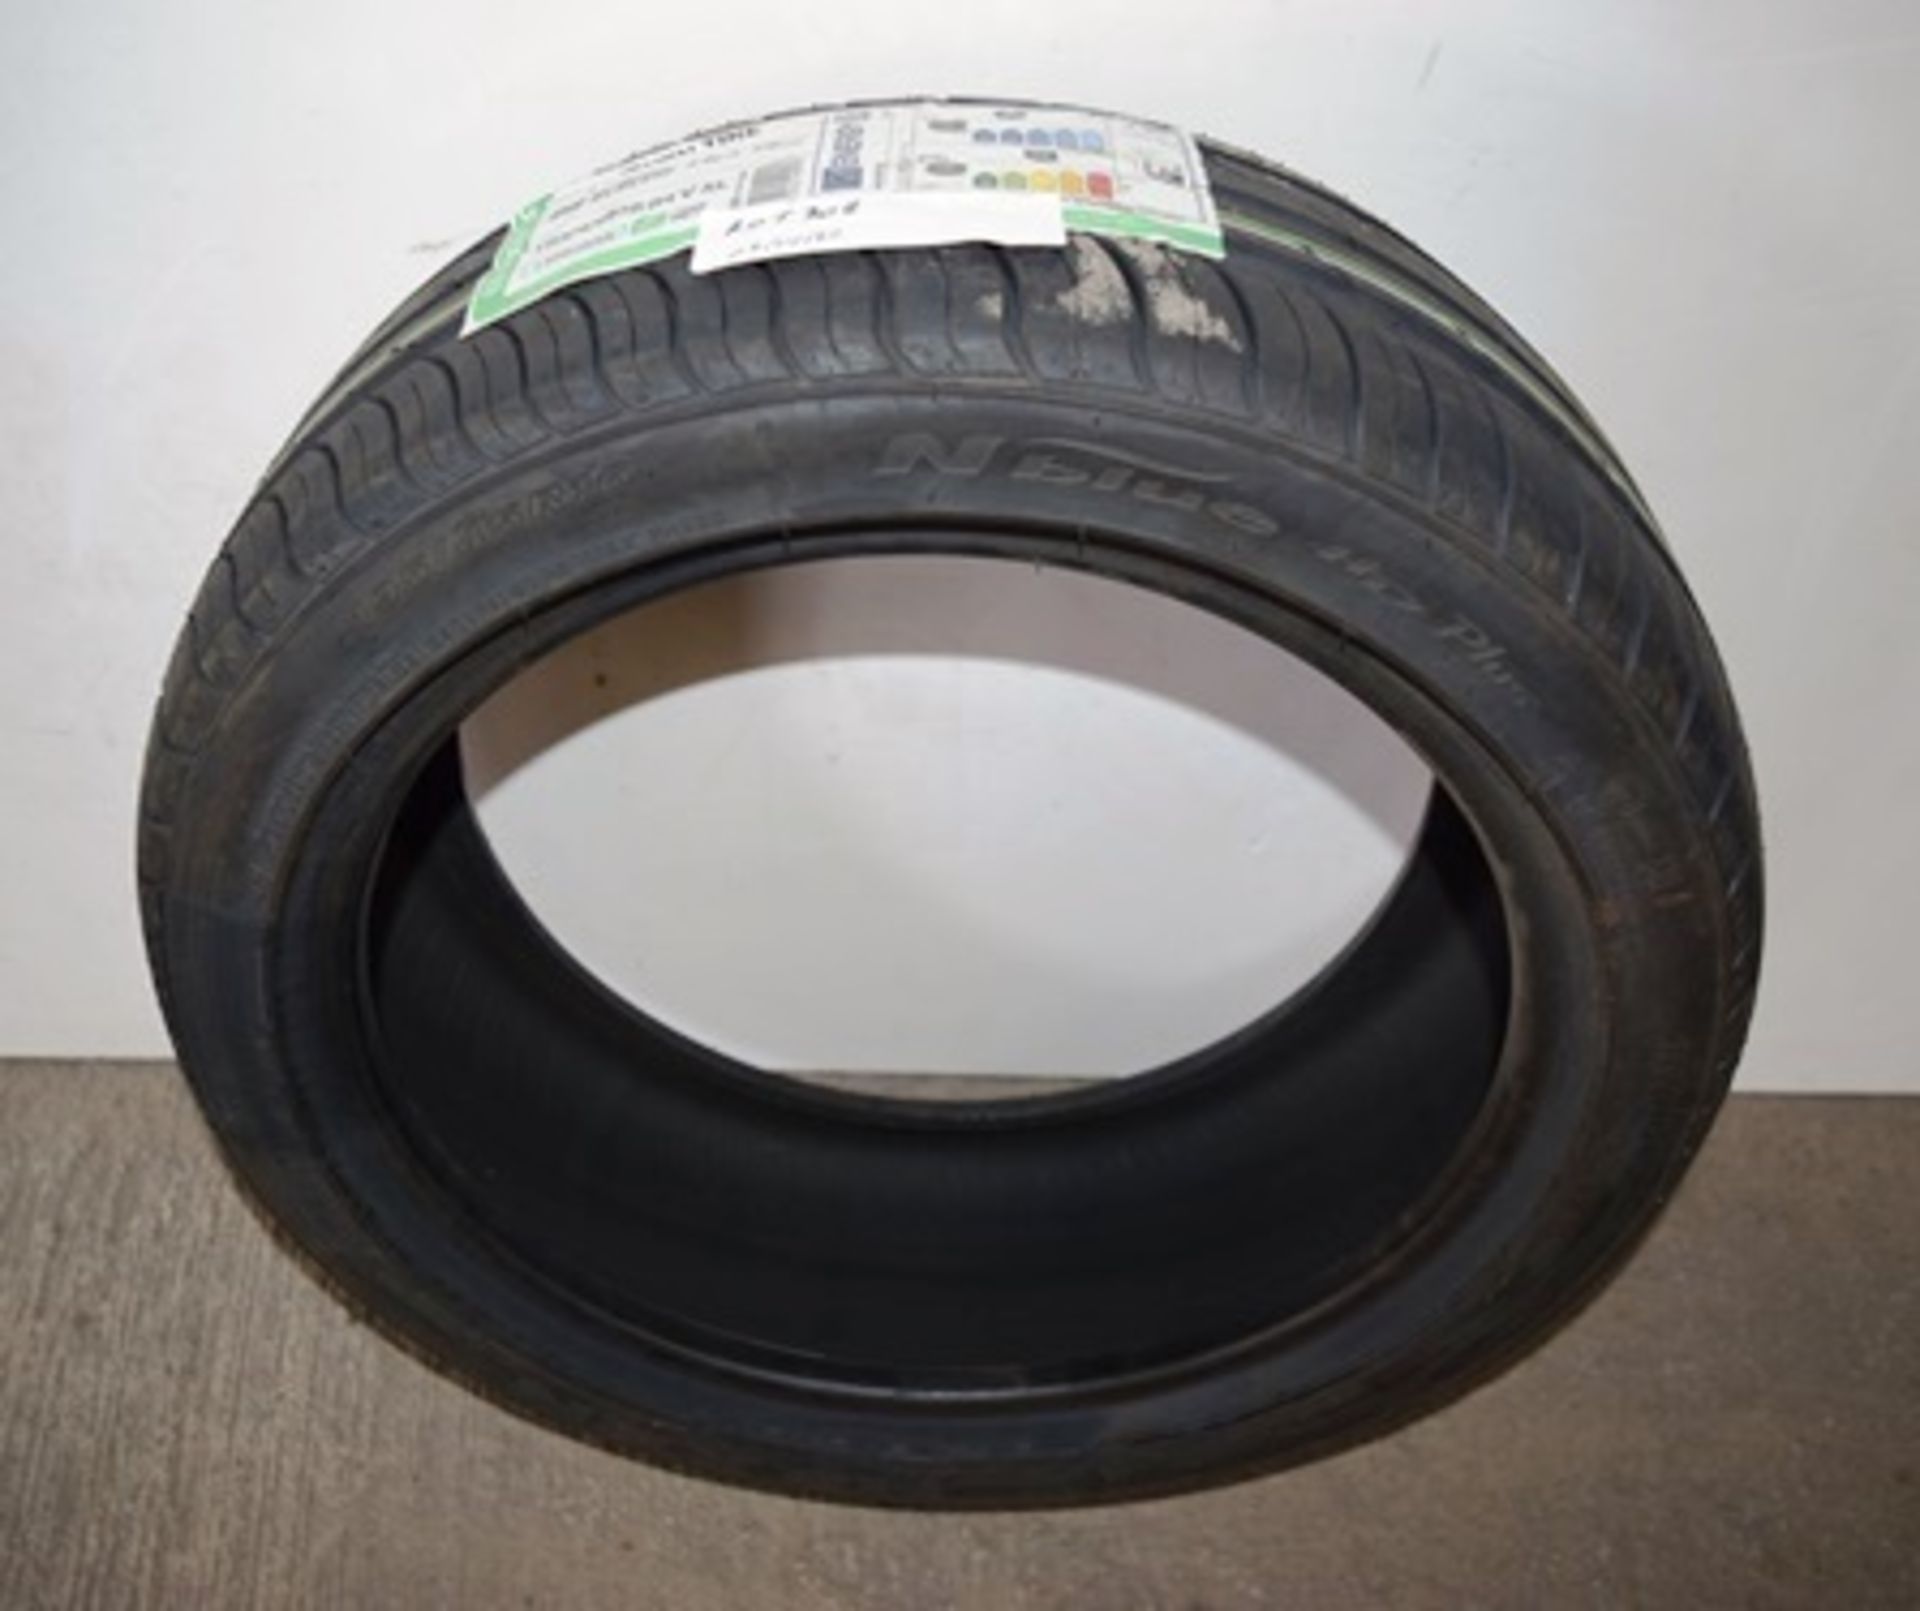 1 x Nexen N Blue HD Plus tyre, size 195/45R16 84V XL - New with label (GS4) - Image 2 of 2